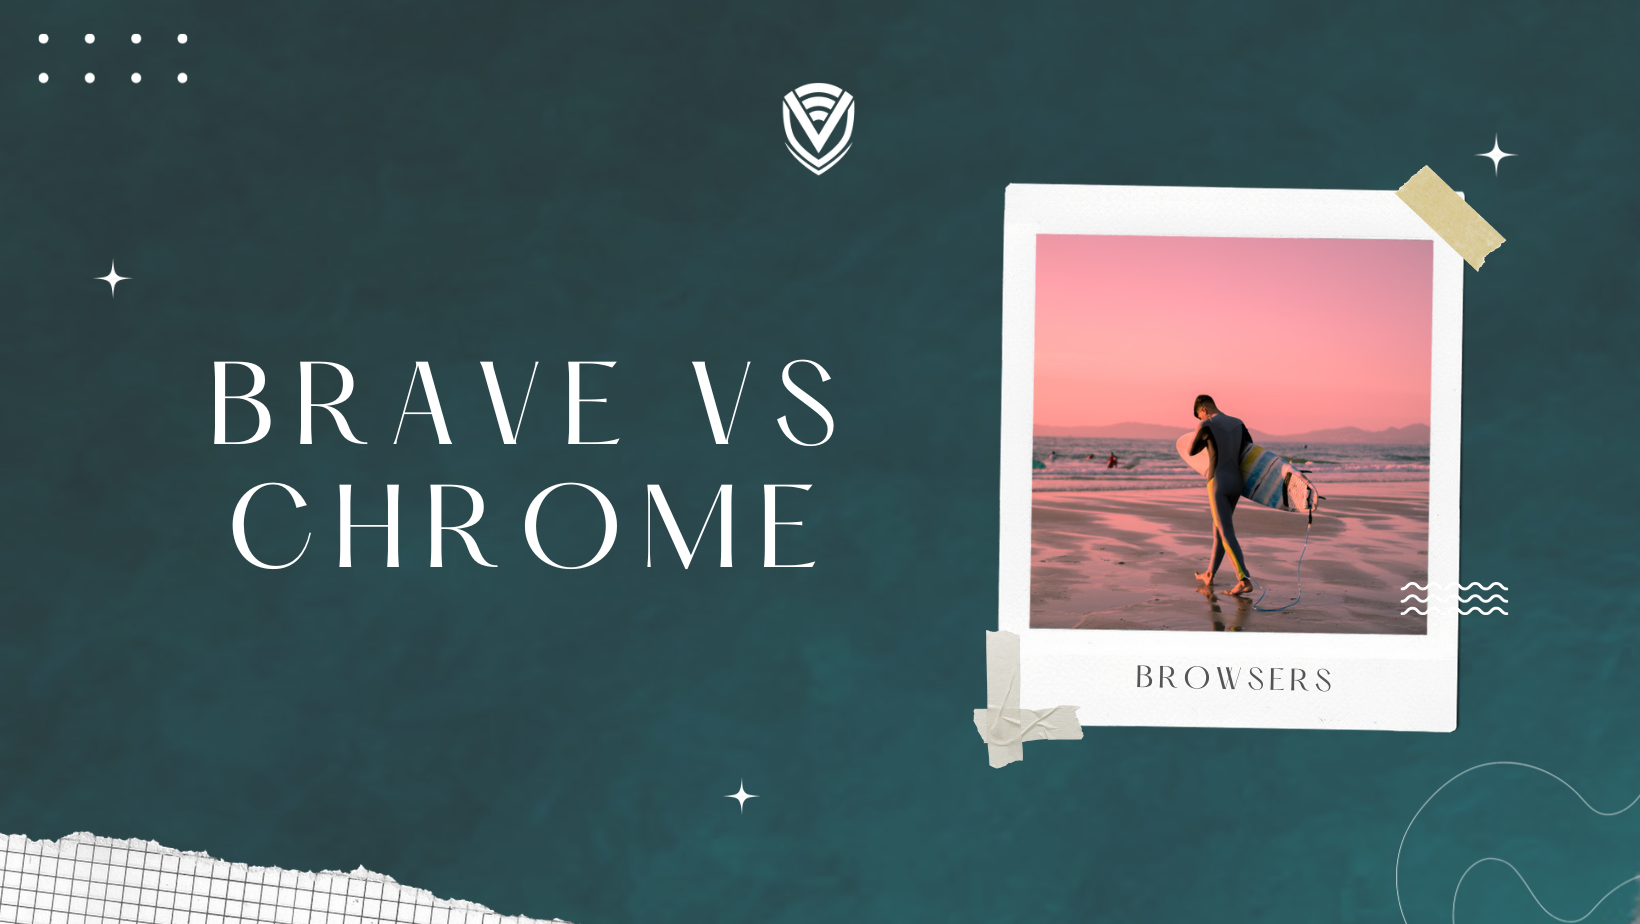 Brave vs. Chrome: Which One Is Better?